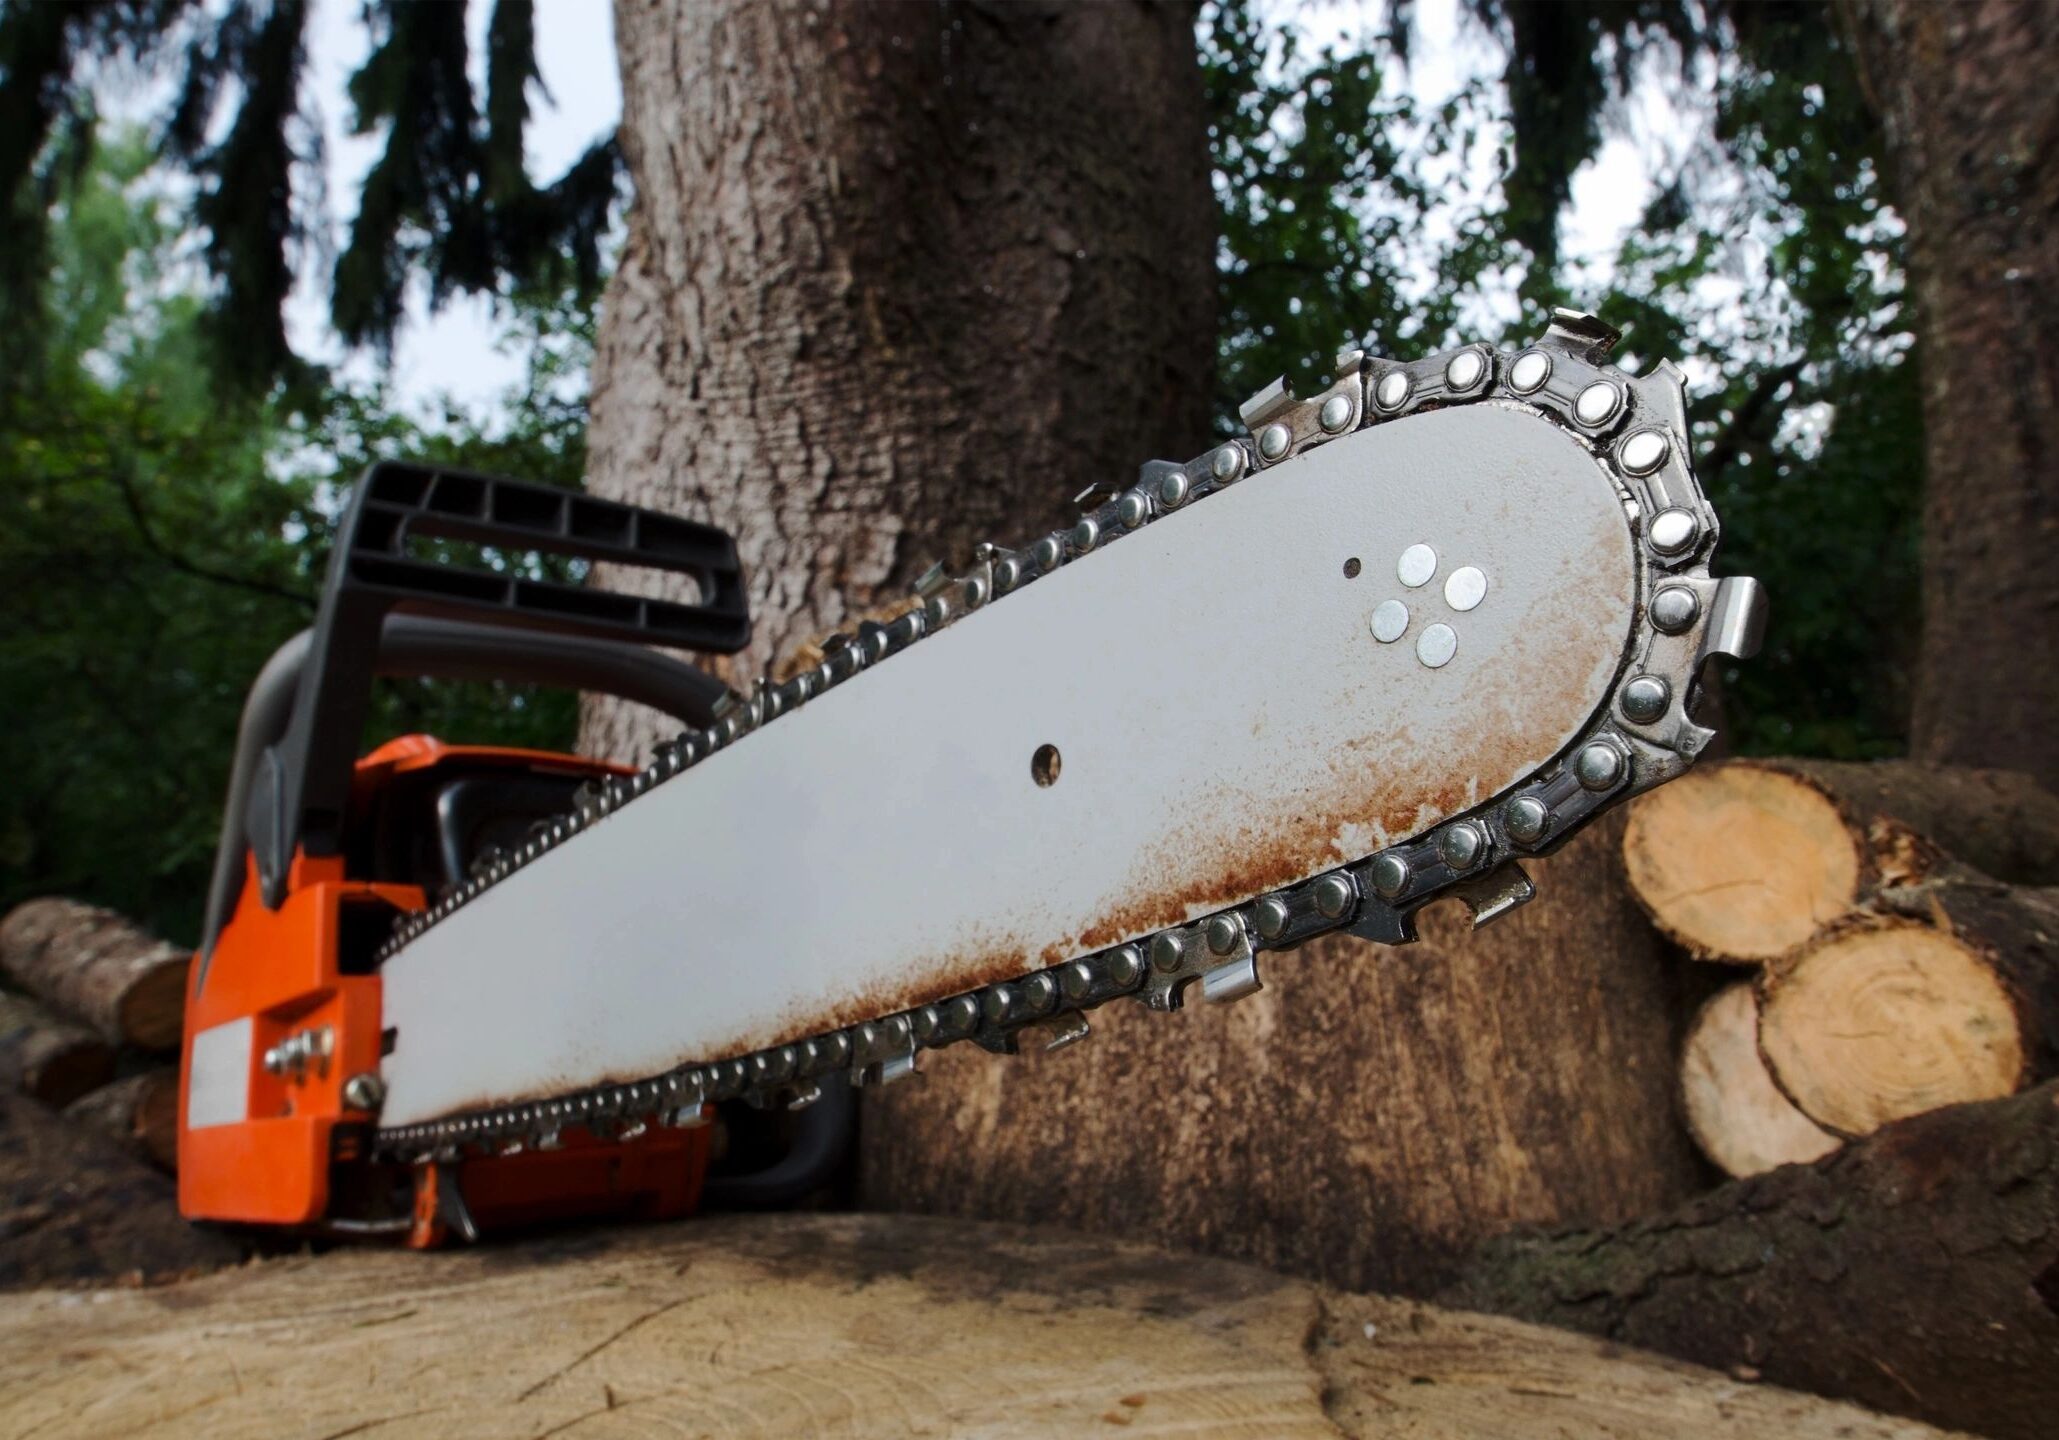 Contact Us - Arbor Rite Tree Service -Tampa, FL, Clearwater, St Petersburg, Wesley Chapel, Lutz - Tree Removal, Tree Trimming, Stump Grinding